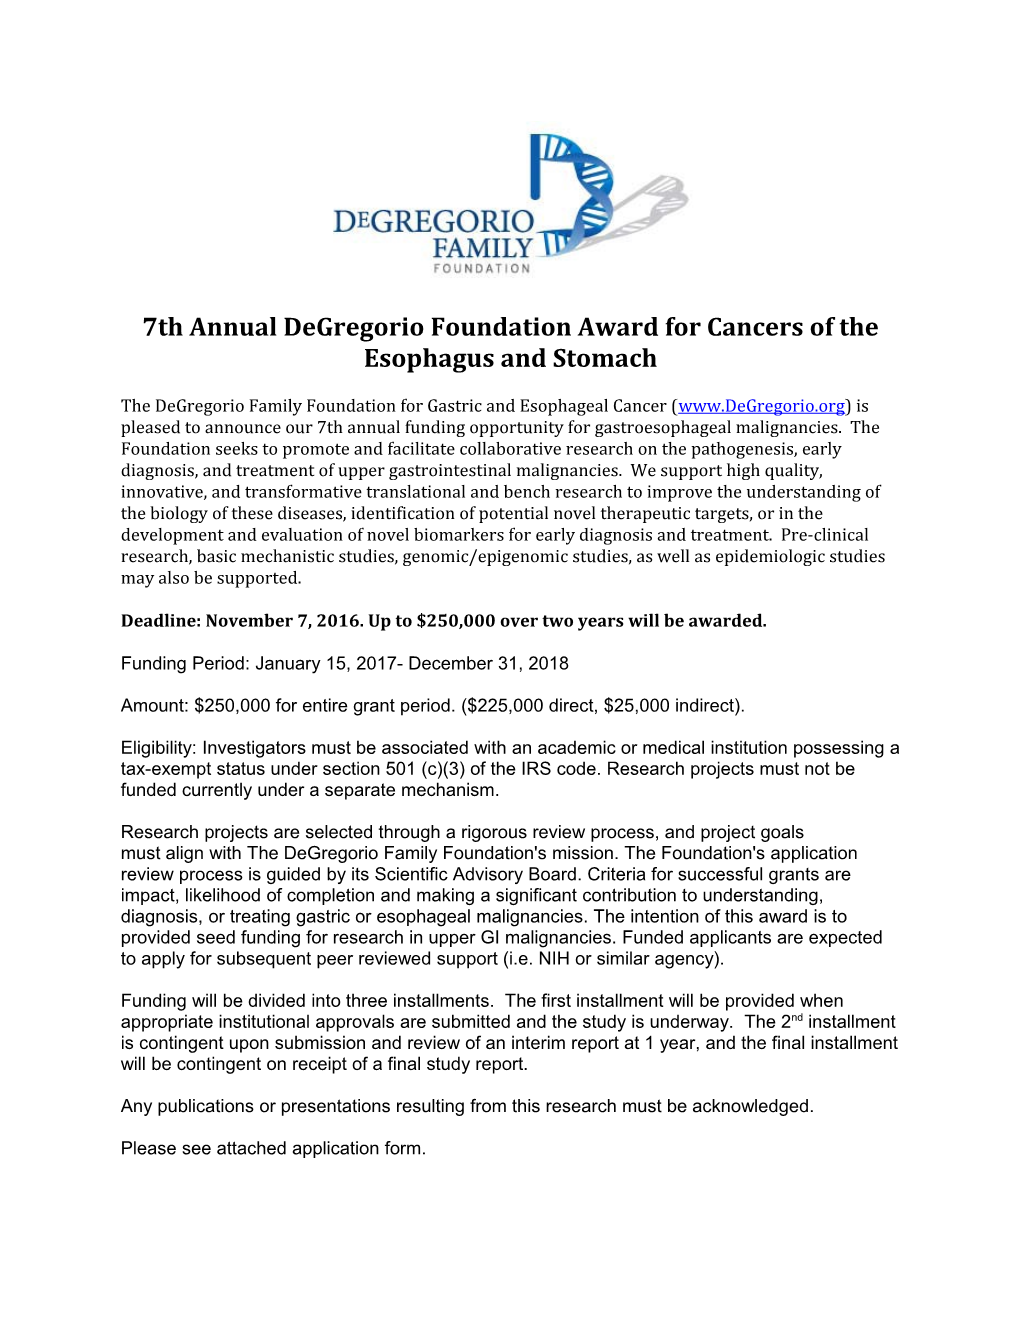 7Th Annual Degregorio Foundation Award for Cancers of the Esophagus and Stomach